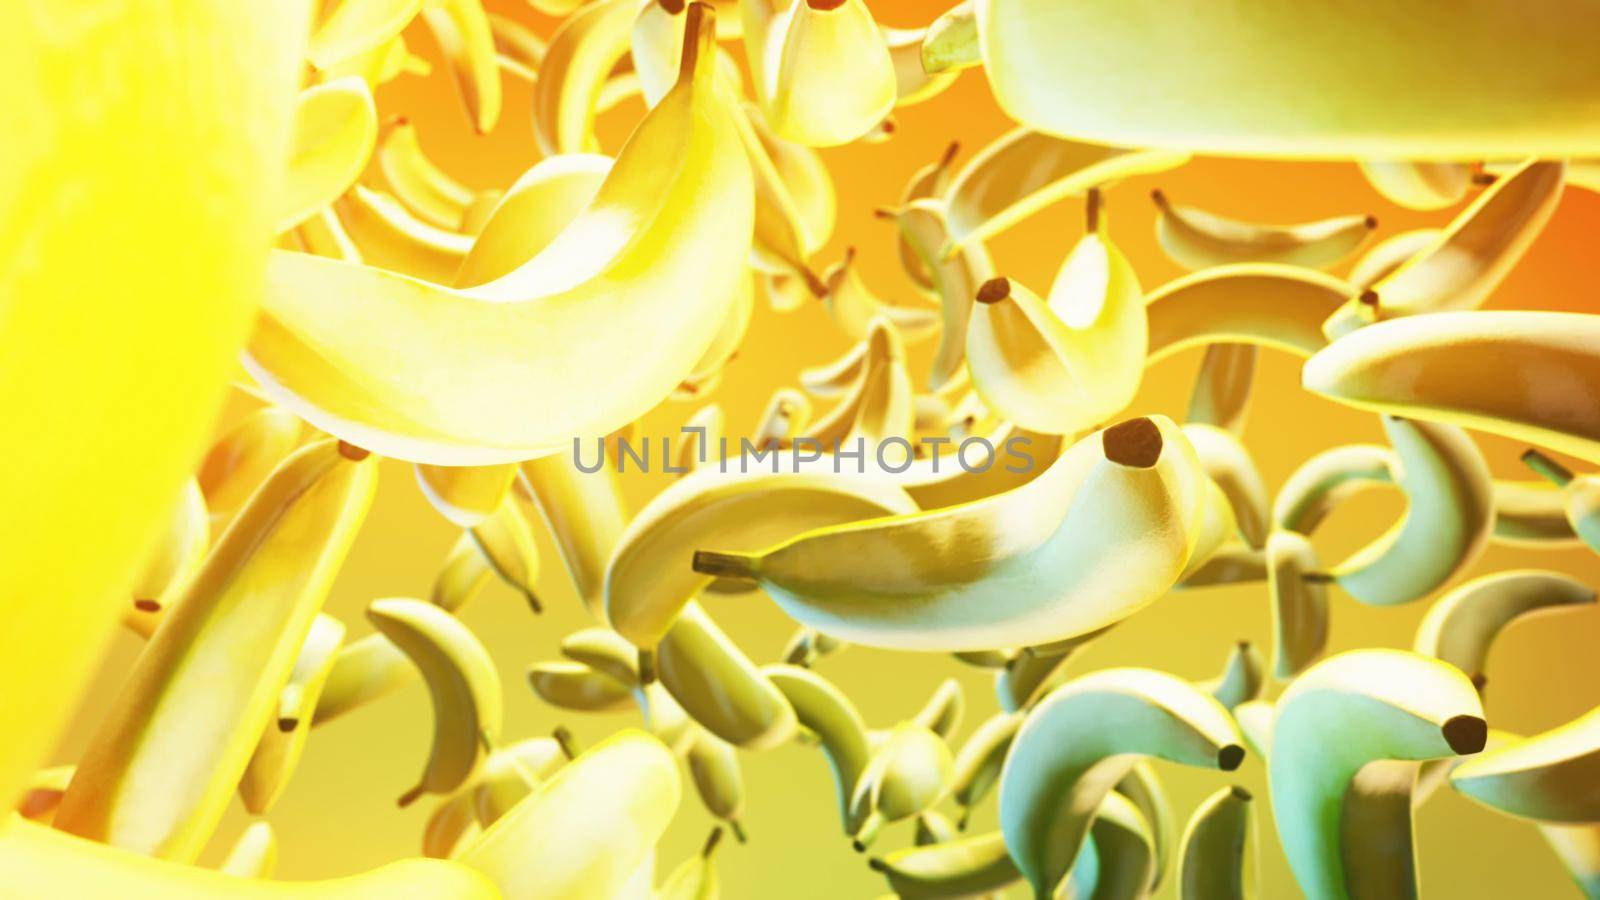 bananas on yellow background.. 3D rendering by designprojects